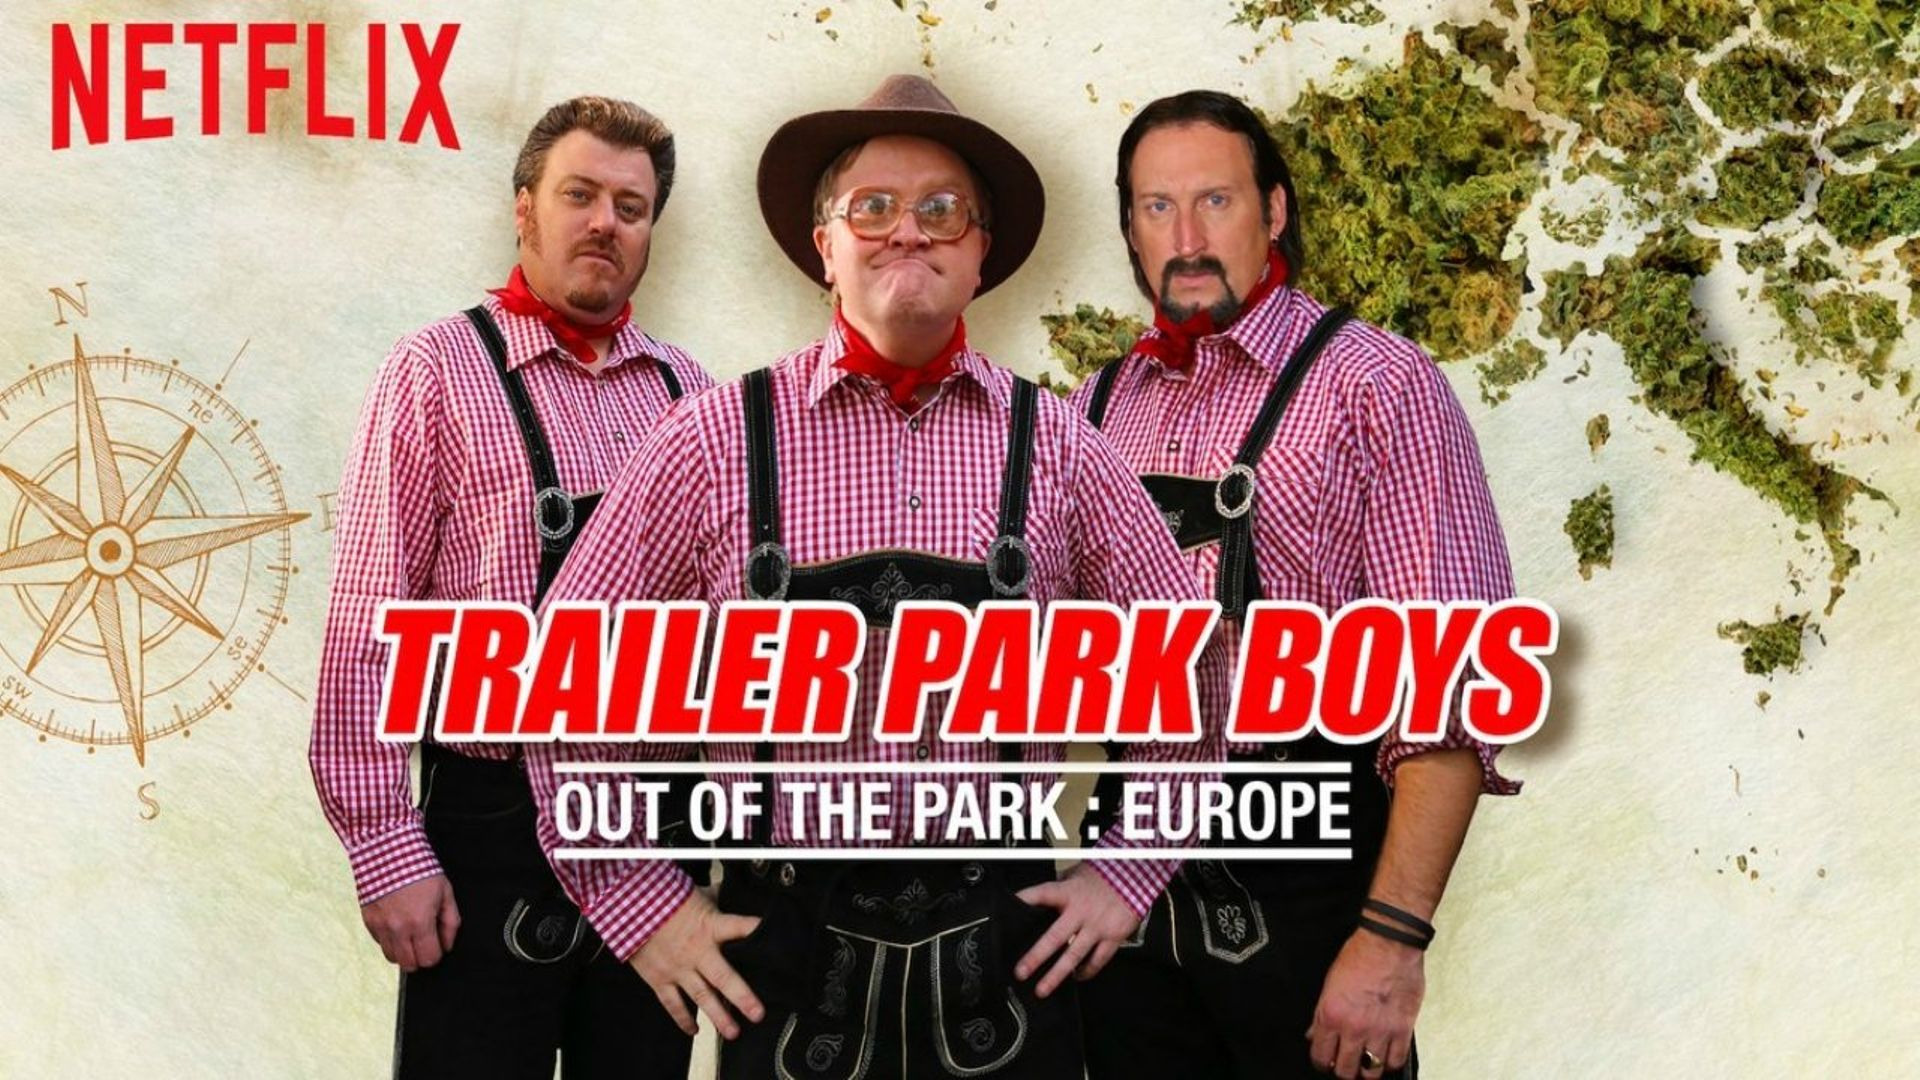 Show Trailer Park Boys: Out of the Park: Europe